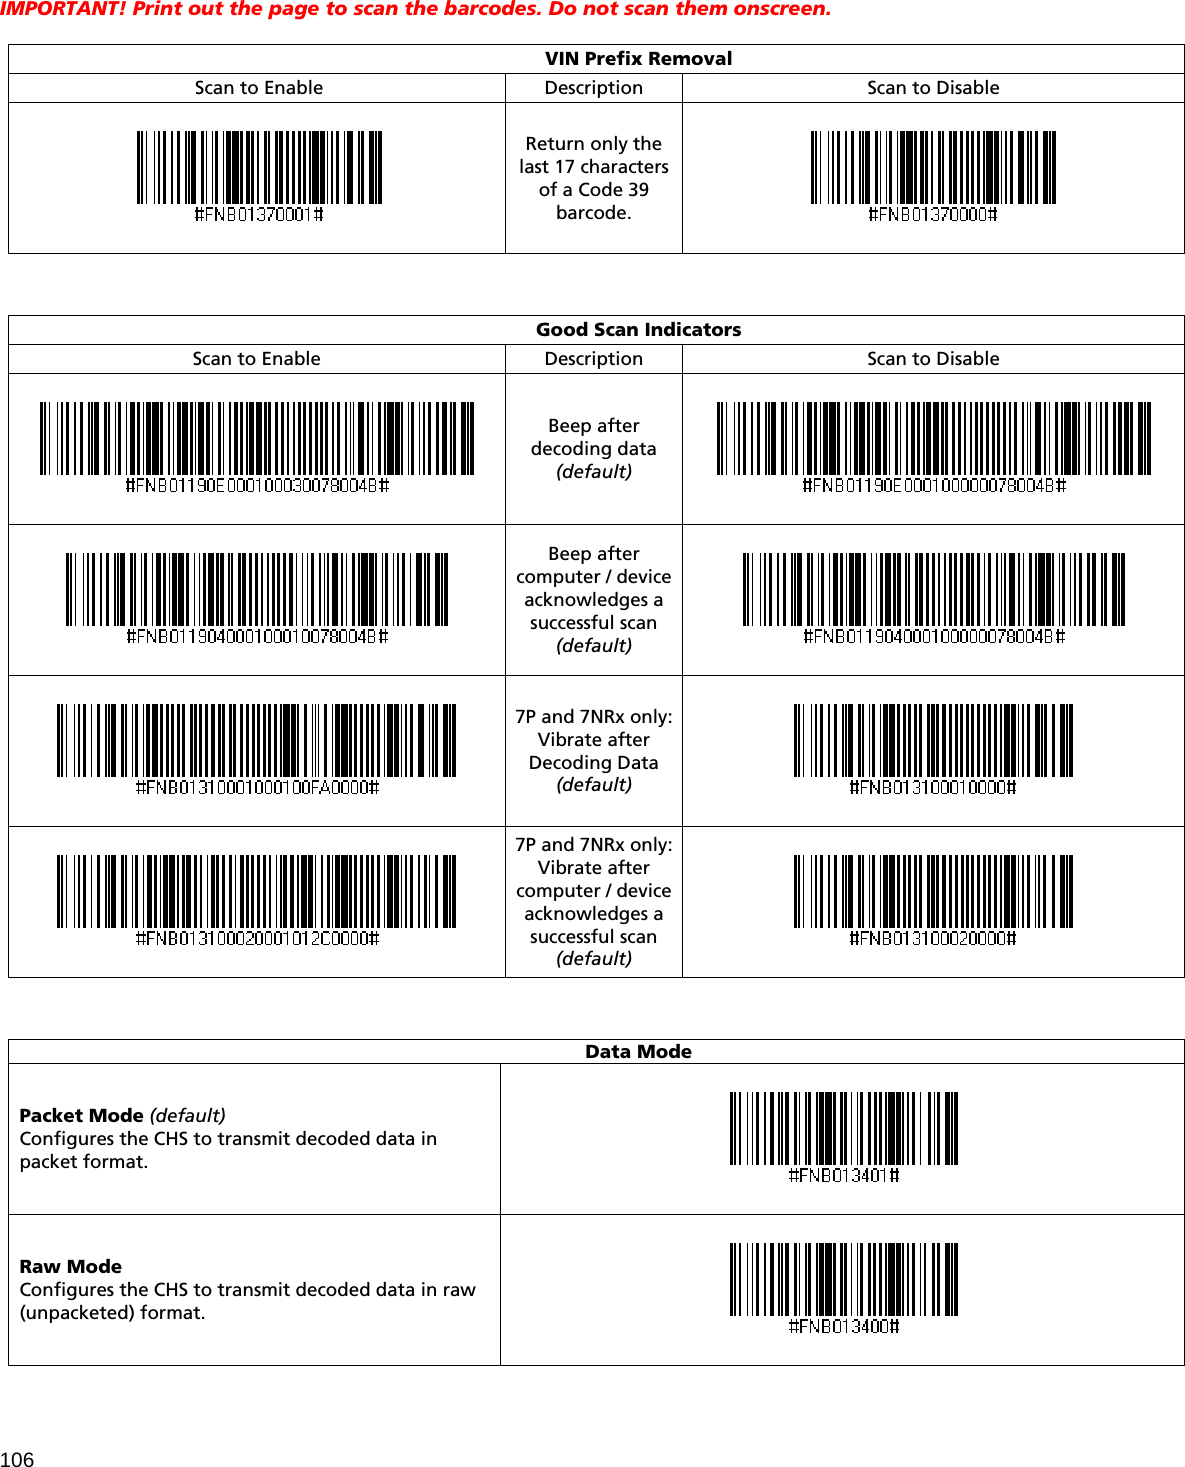 106 IMPORTANT! Print out the page to scan the barcodes. Do not scan them onscreen.   VIN Prefix Removal Scan to Enable Description  Scan to Disable  Return only the last 17 characters of a Code 39 barcode.     Good Scan Indicators Scan to Enable Description  Scan to Disable  Beep after decoding data (default)    Beep after computer / device acknowledges a successful scan (default)    7P and 7NRx only: Vibrate after Decoding Data (default)   7P and 7NRx only: Vibrate after computer / device acknowledges a successful scan (default)      Data Mode Packet Mode (default) Configures the CHS to transmit decoded data in packet format.  Raw Mode Configures the CHS to transmit decoded data in raw (unpacketed) format.  